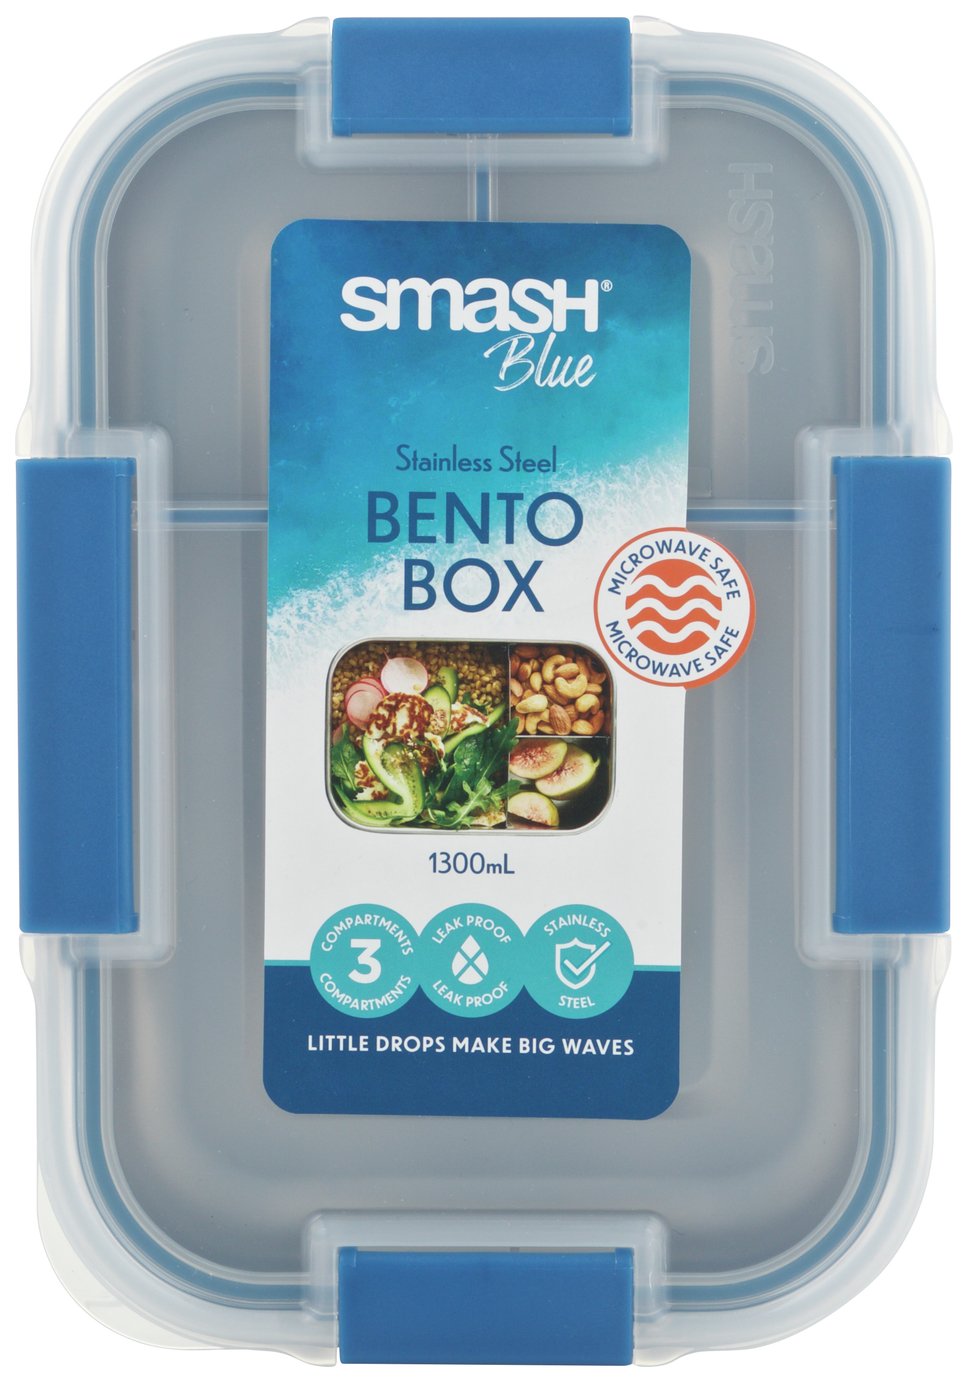 Smash Blue Stainless Steel Bento Lunch Box